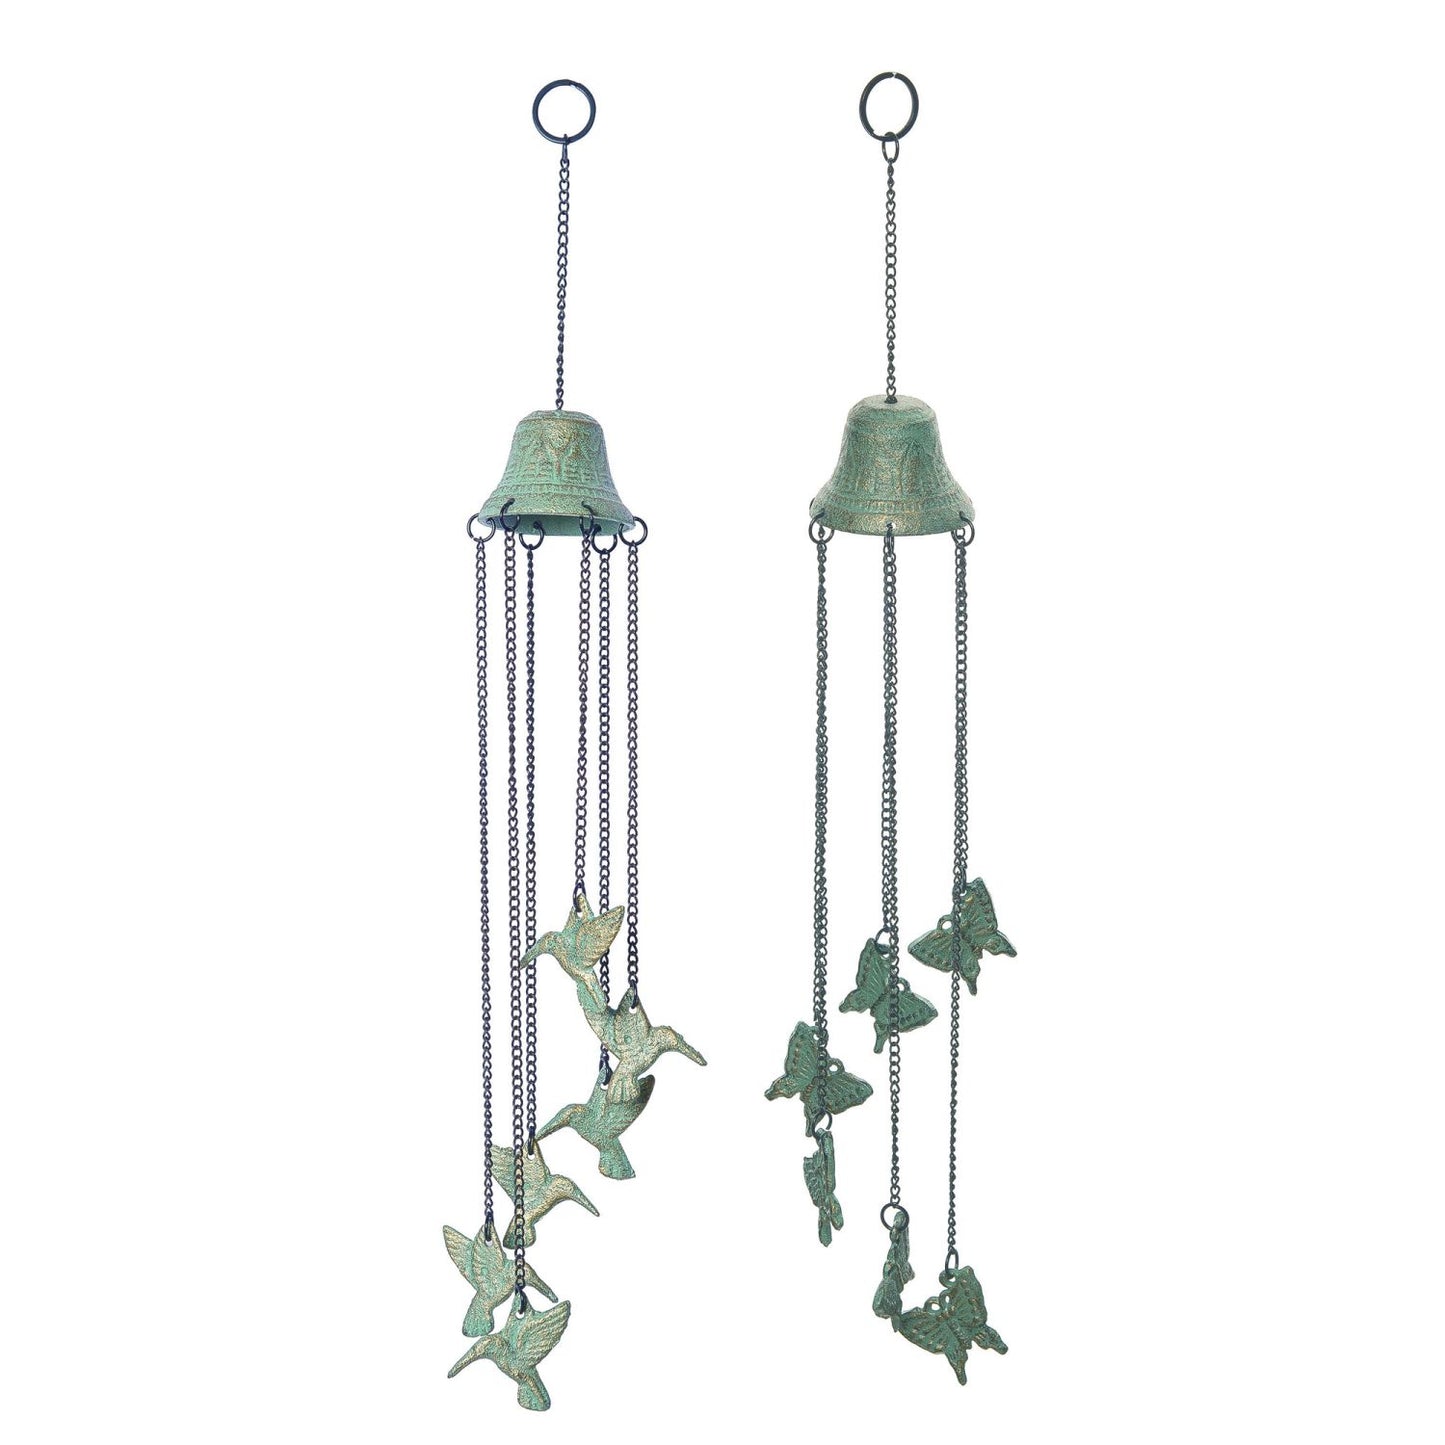 Transpac Iron Butterfly Hanging Chime, Set Of 2, Assortment